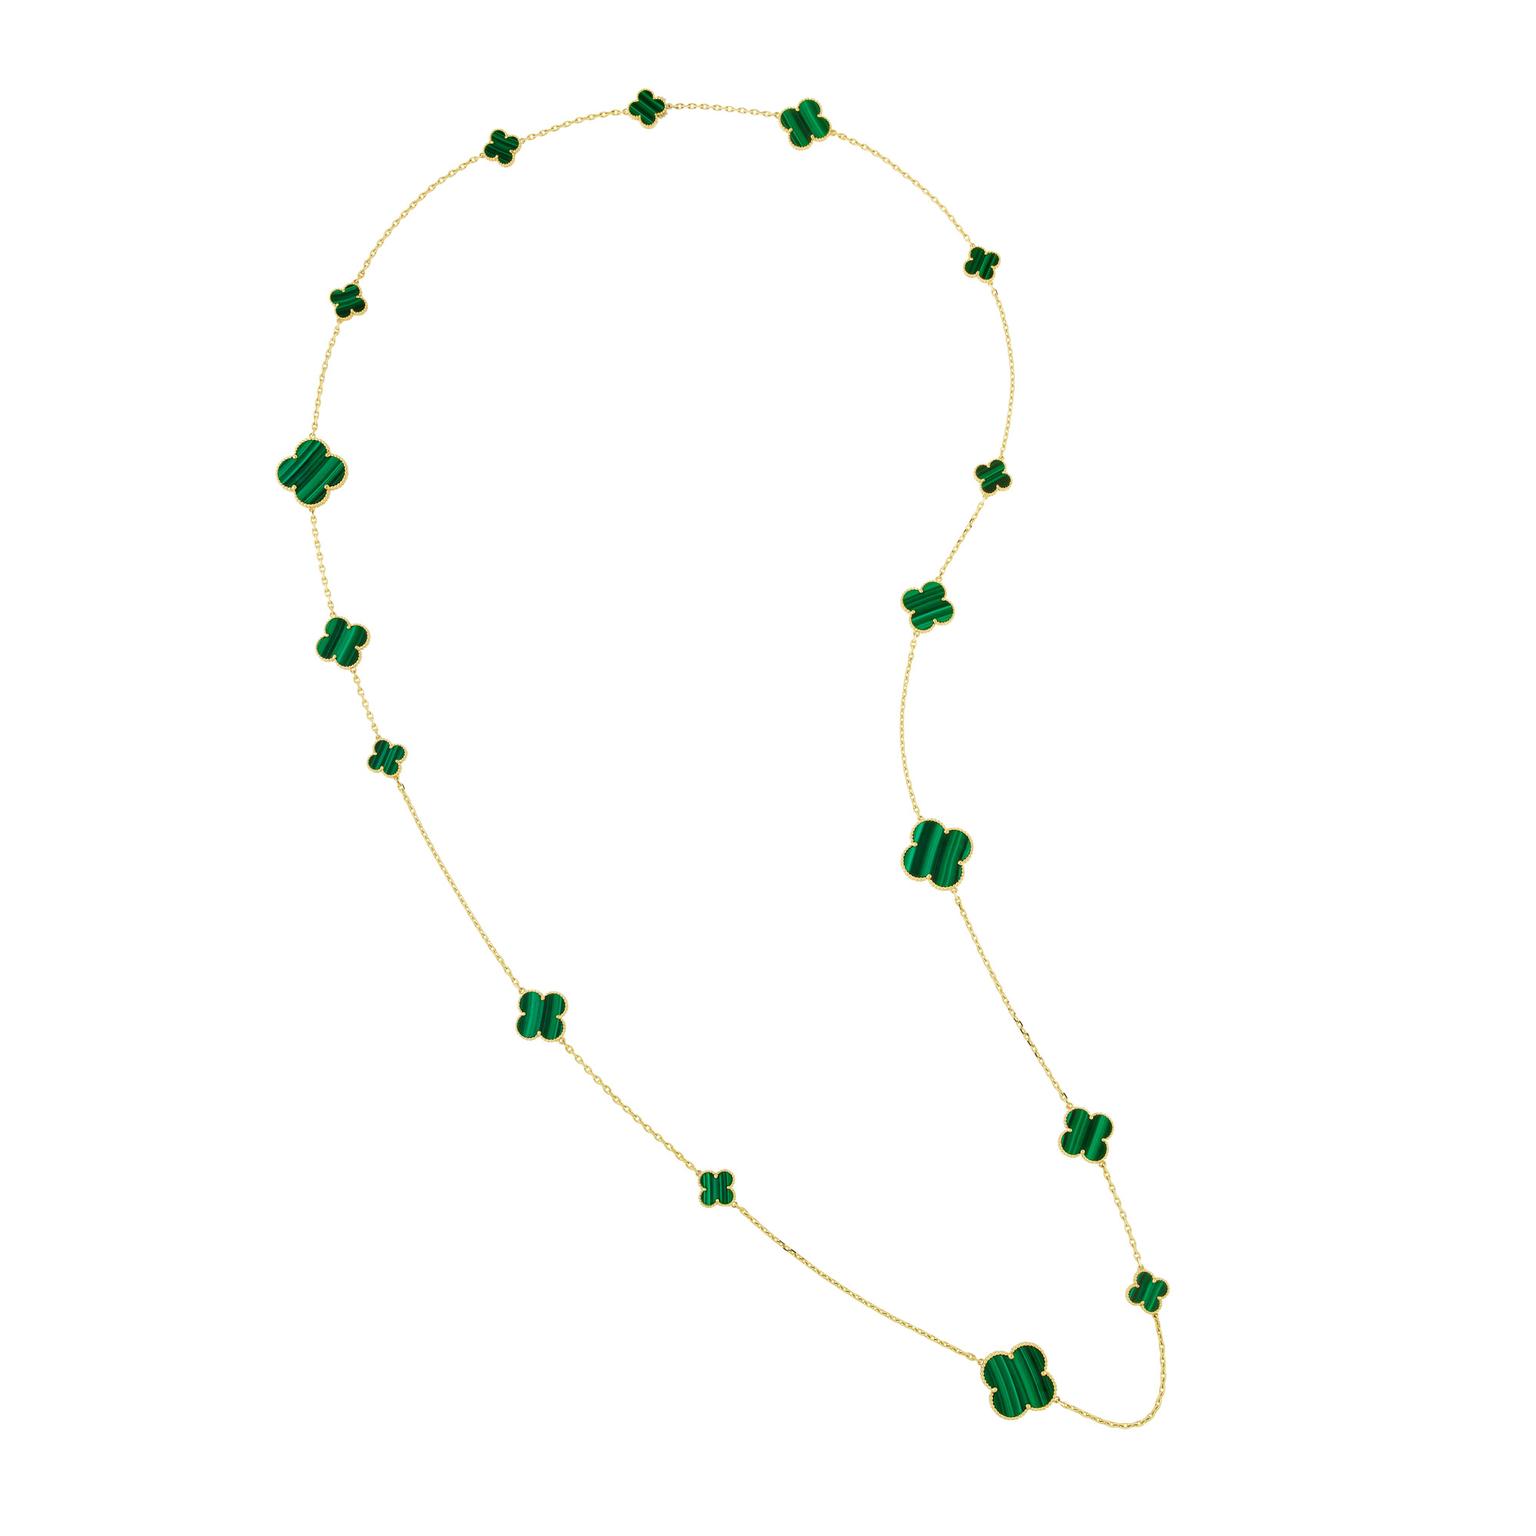 9ct Yellow Gold Malachite Four Leaf Clover Necklace | My Jewellery Shop